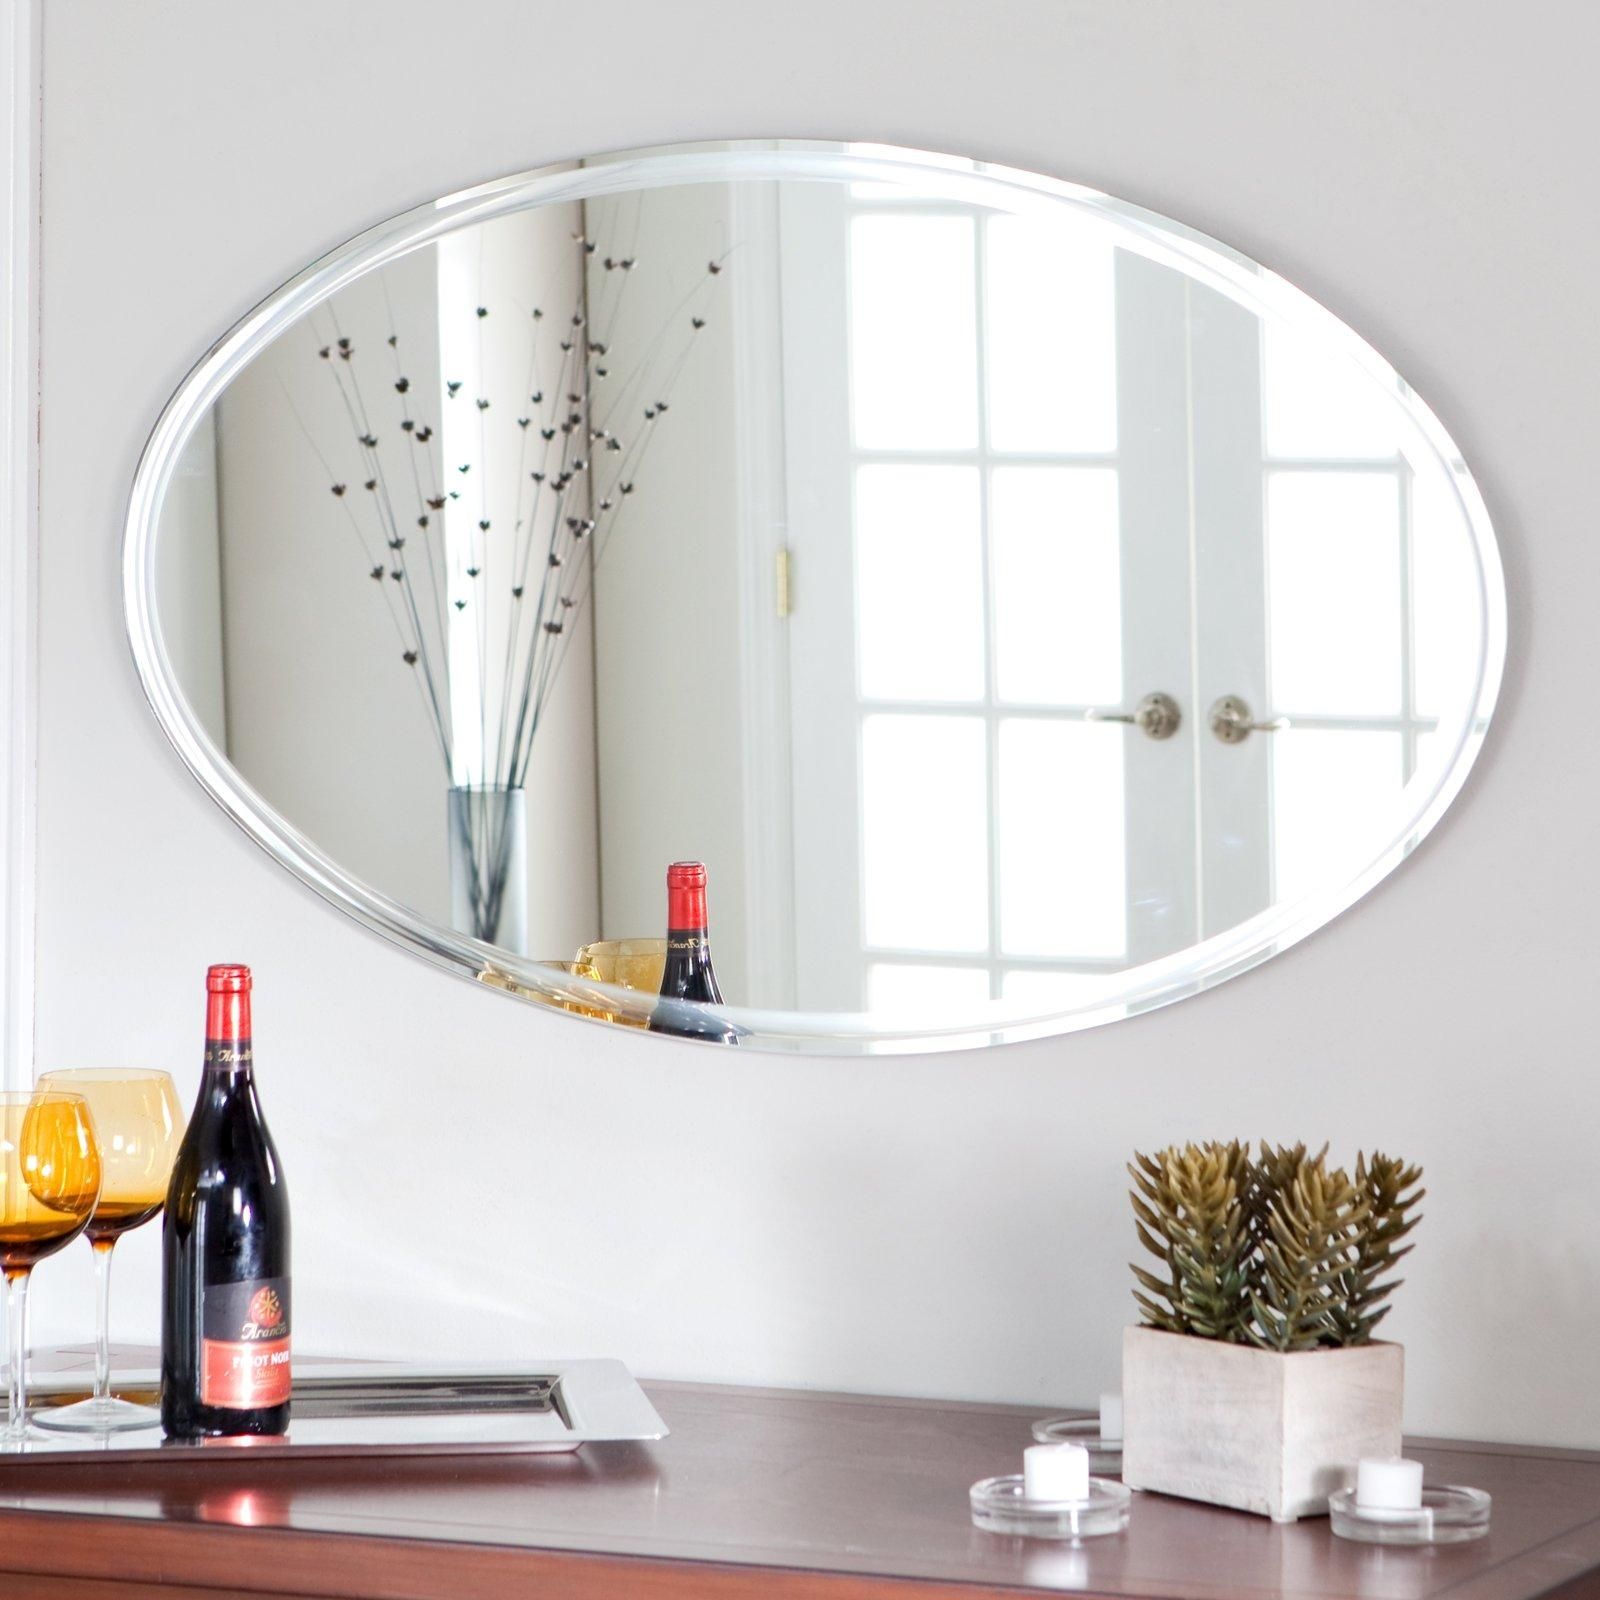 Bathroom Wall Mirrors: Reflections Of Style And Function